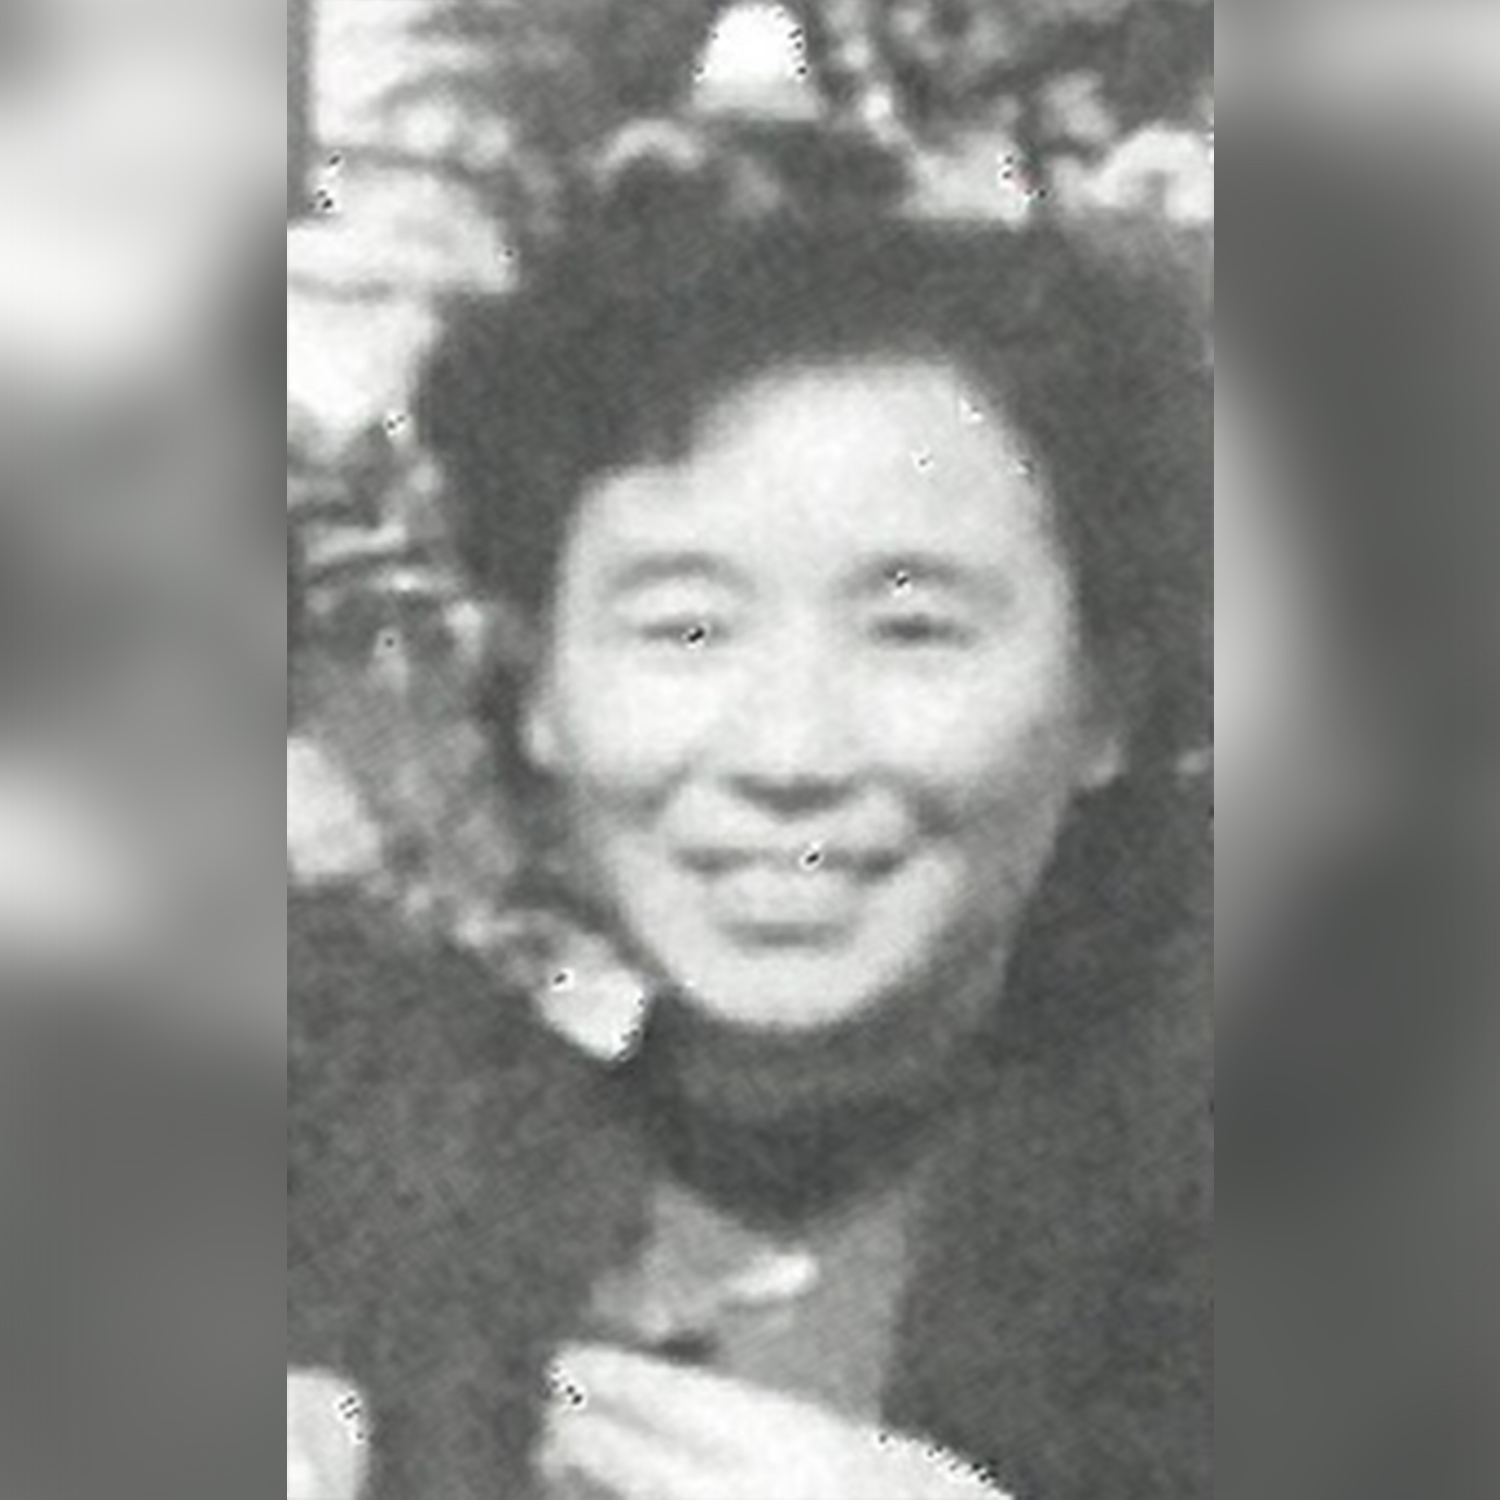 In 1955, aged 47. (Source: data-max.co.jp)